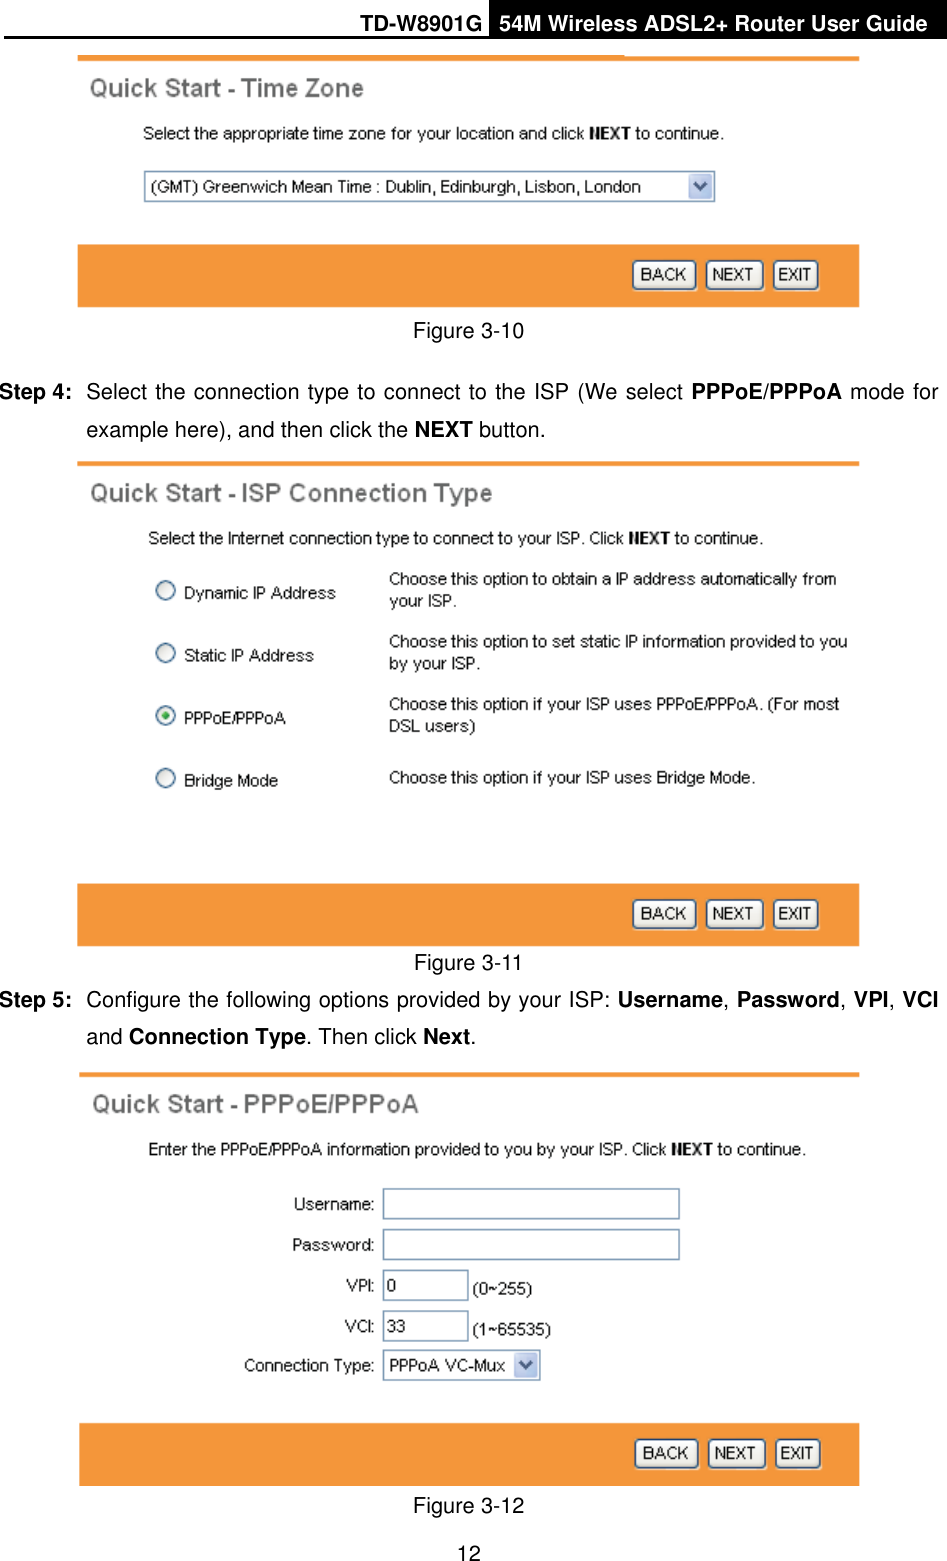 TD-W8901G 54M Wireless ADSL2+ Router User Guide12Figure 3-10 Step 4:  Select the connection type to connect to the ISP (We select PPPoE/PPPoA mode for example here), and then click the NEXT button. Figure 3-11 Step 5:  Configure the following options provided by your ISP: Username,Password, VPI,VCIand Connection Type. Then click Next.Figure 3-12 